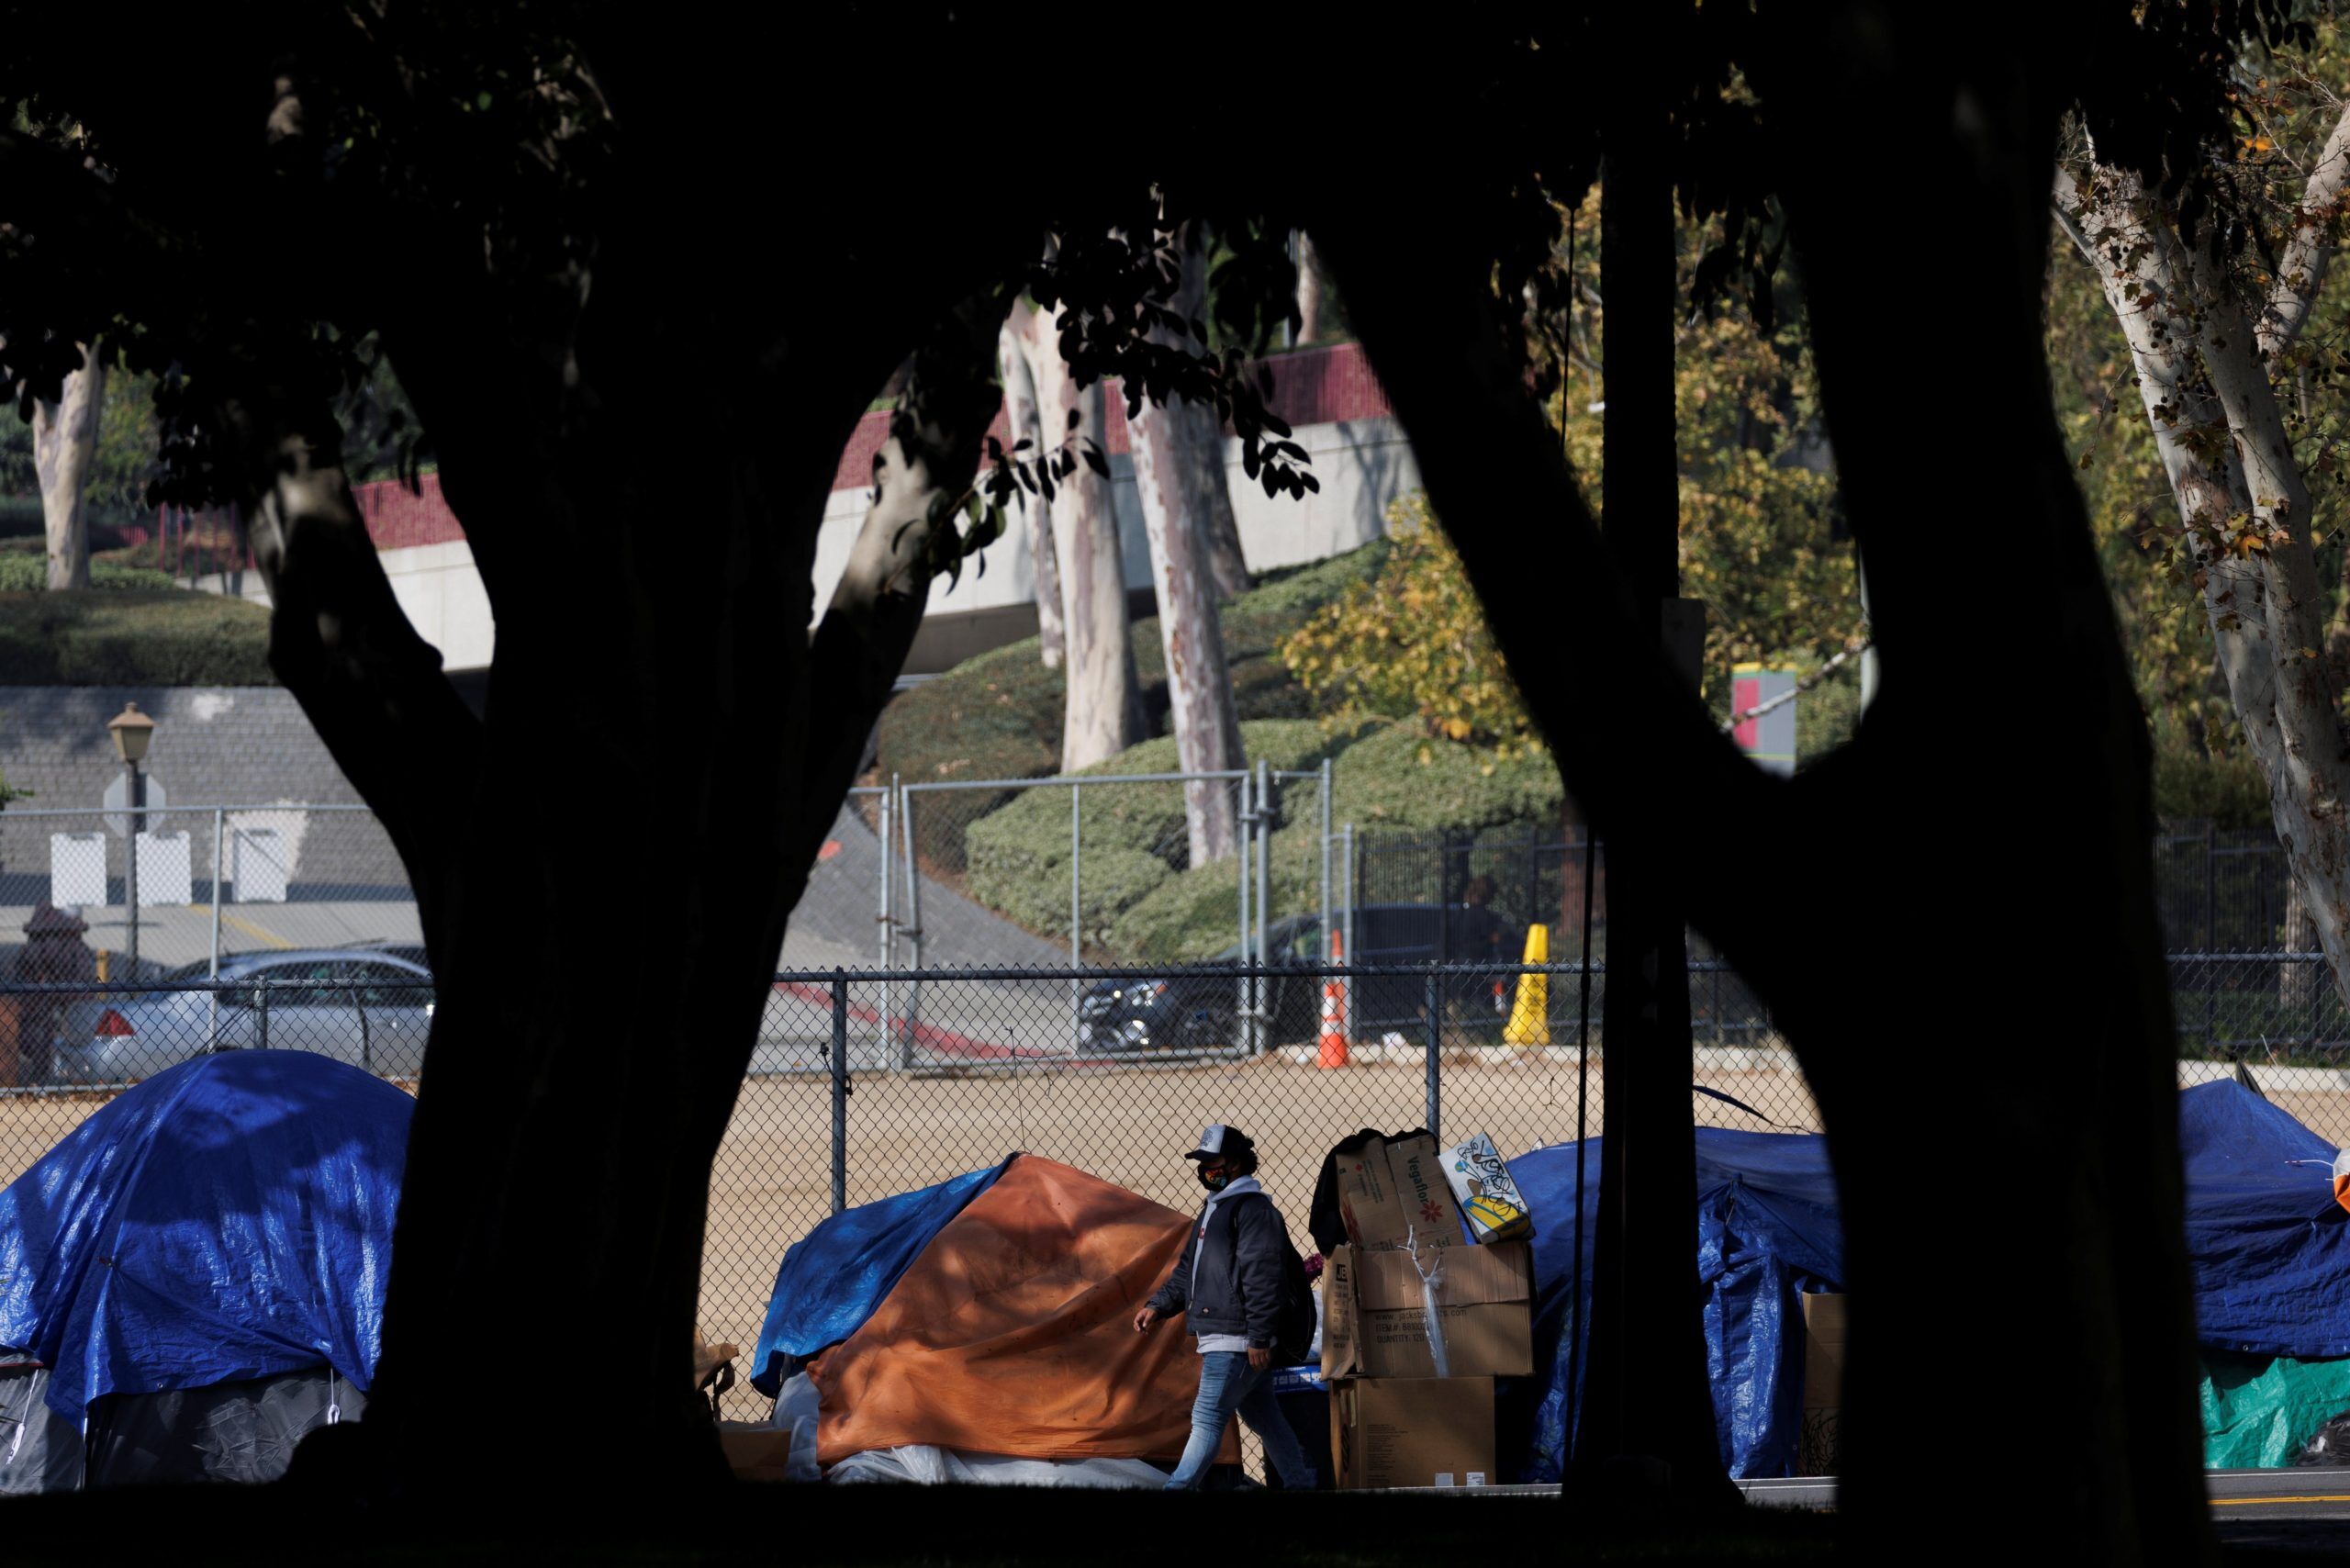 Tents for the homeless are seen near City Hall in Los Angeles Nov. 16, 2021. (CNS photo/Mike Blake, Reuters)